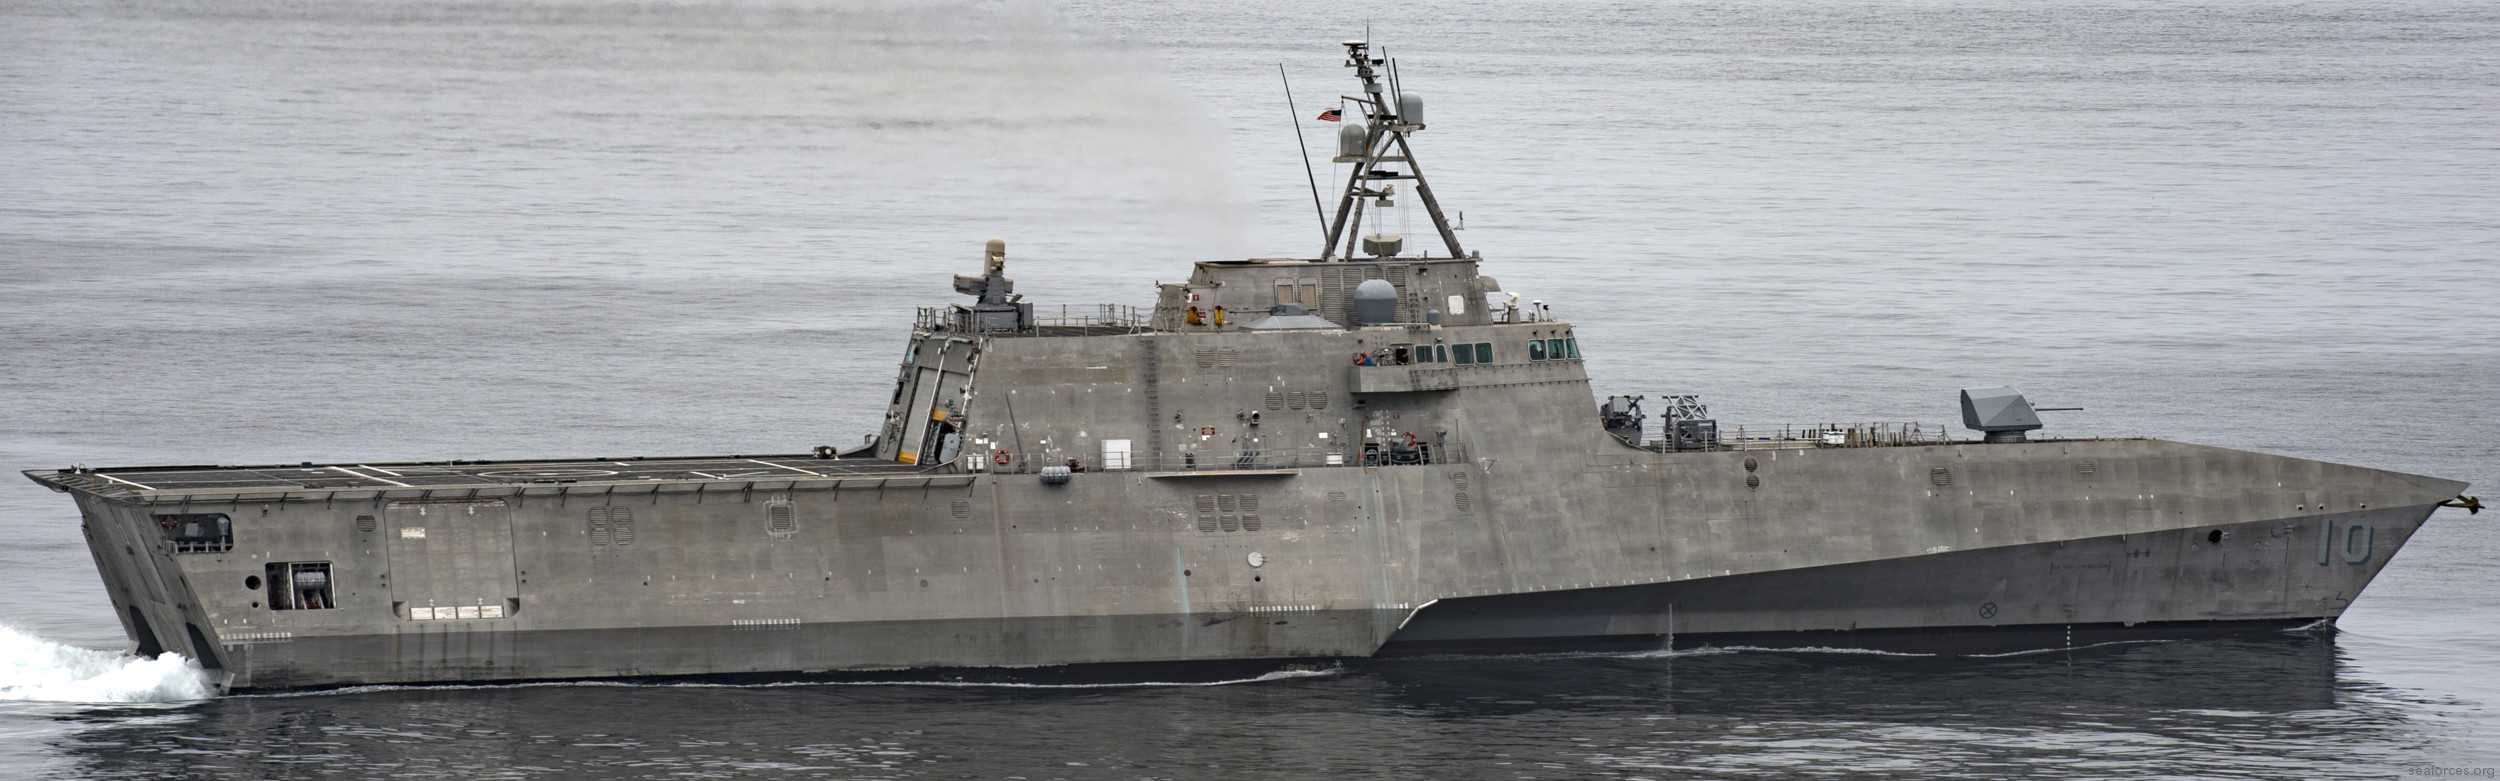 lcs-10 uss gabrielle giffords littoral combat ship independence class us navy 13